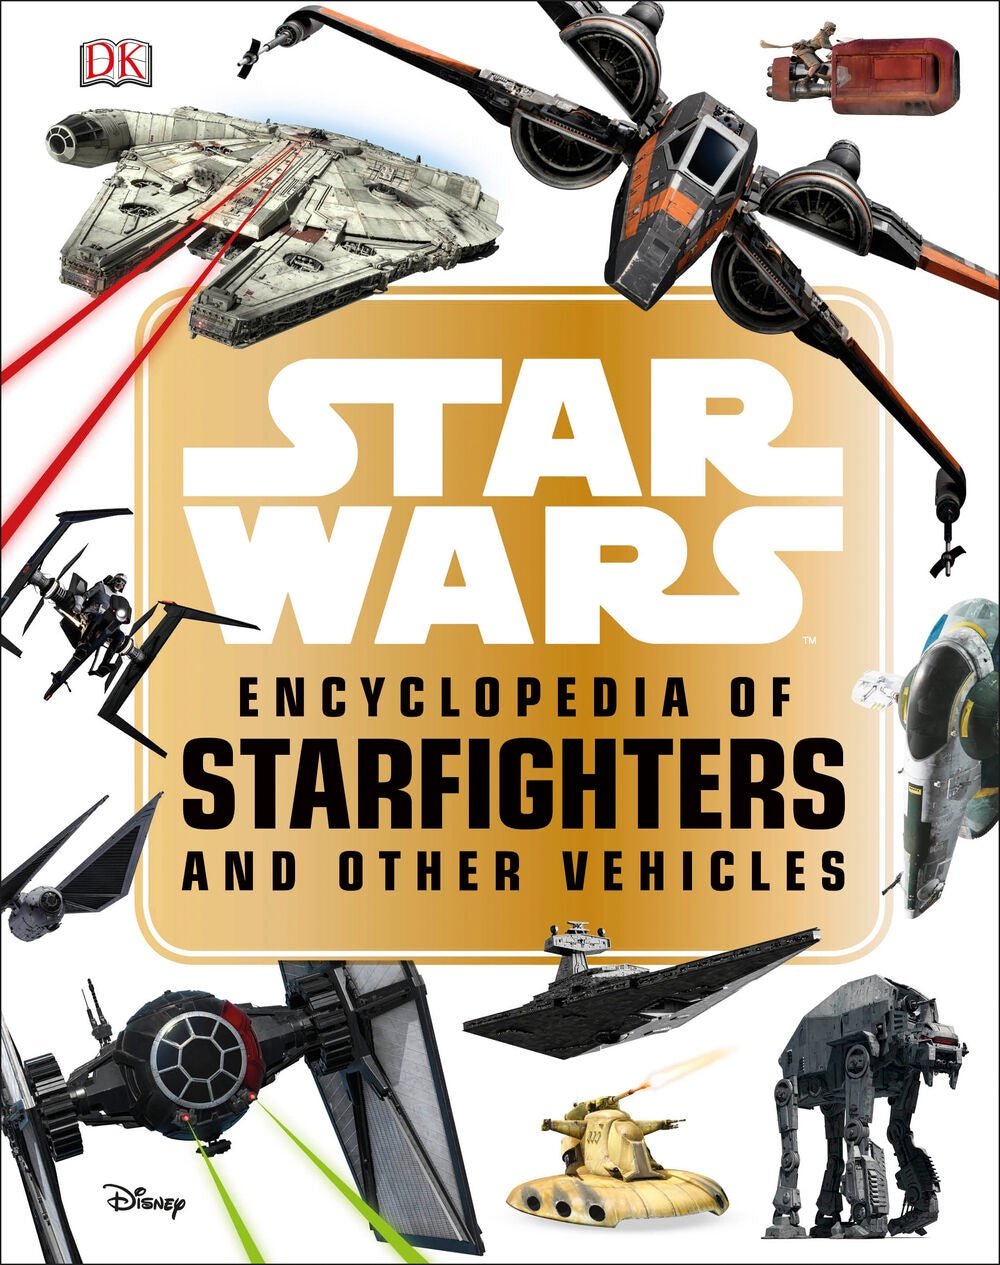 STAR WARS ENCYCLOPEDIA OF STARFIGHTERS AND OTHER VEHICLES HC